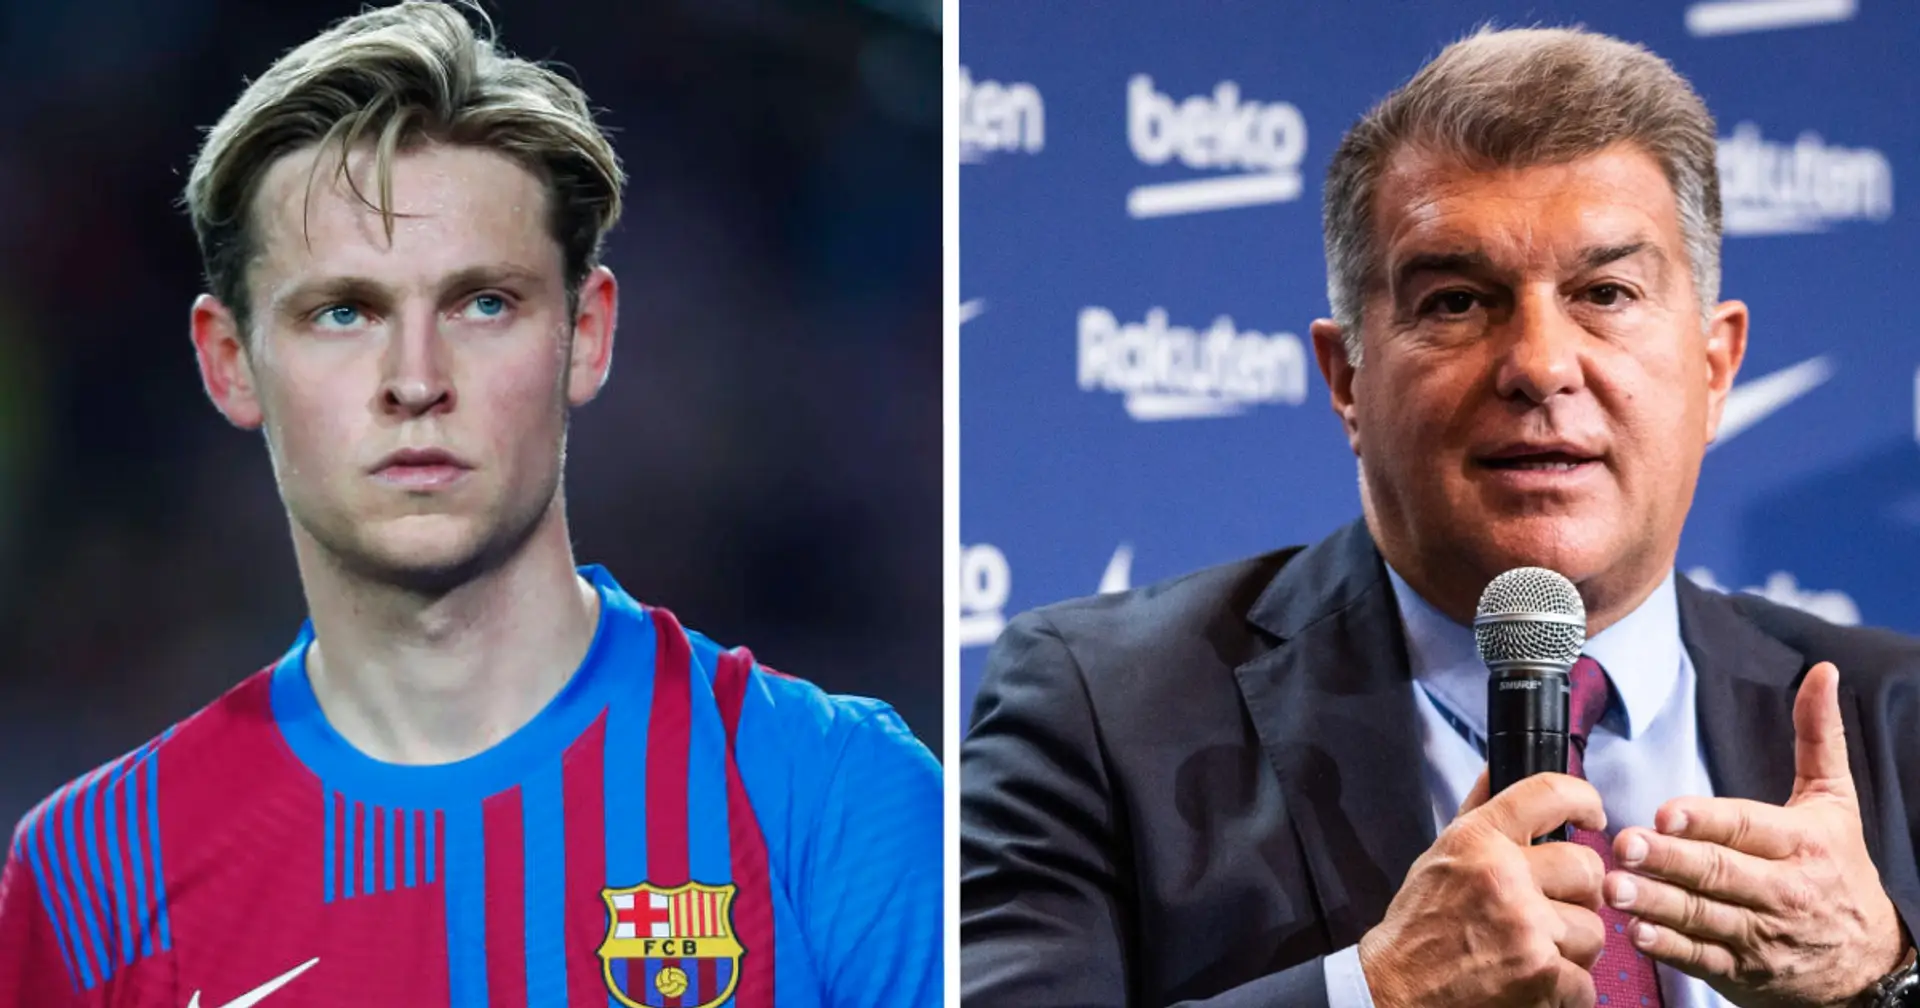 Explained: What happens if criminality allegations are true in contracts of De Jong and 3 others